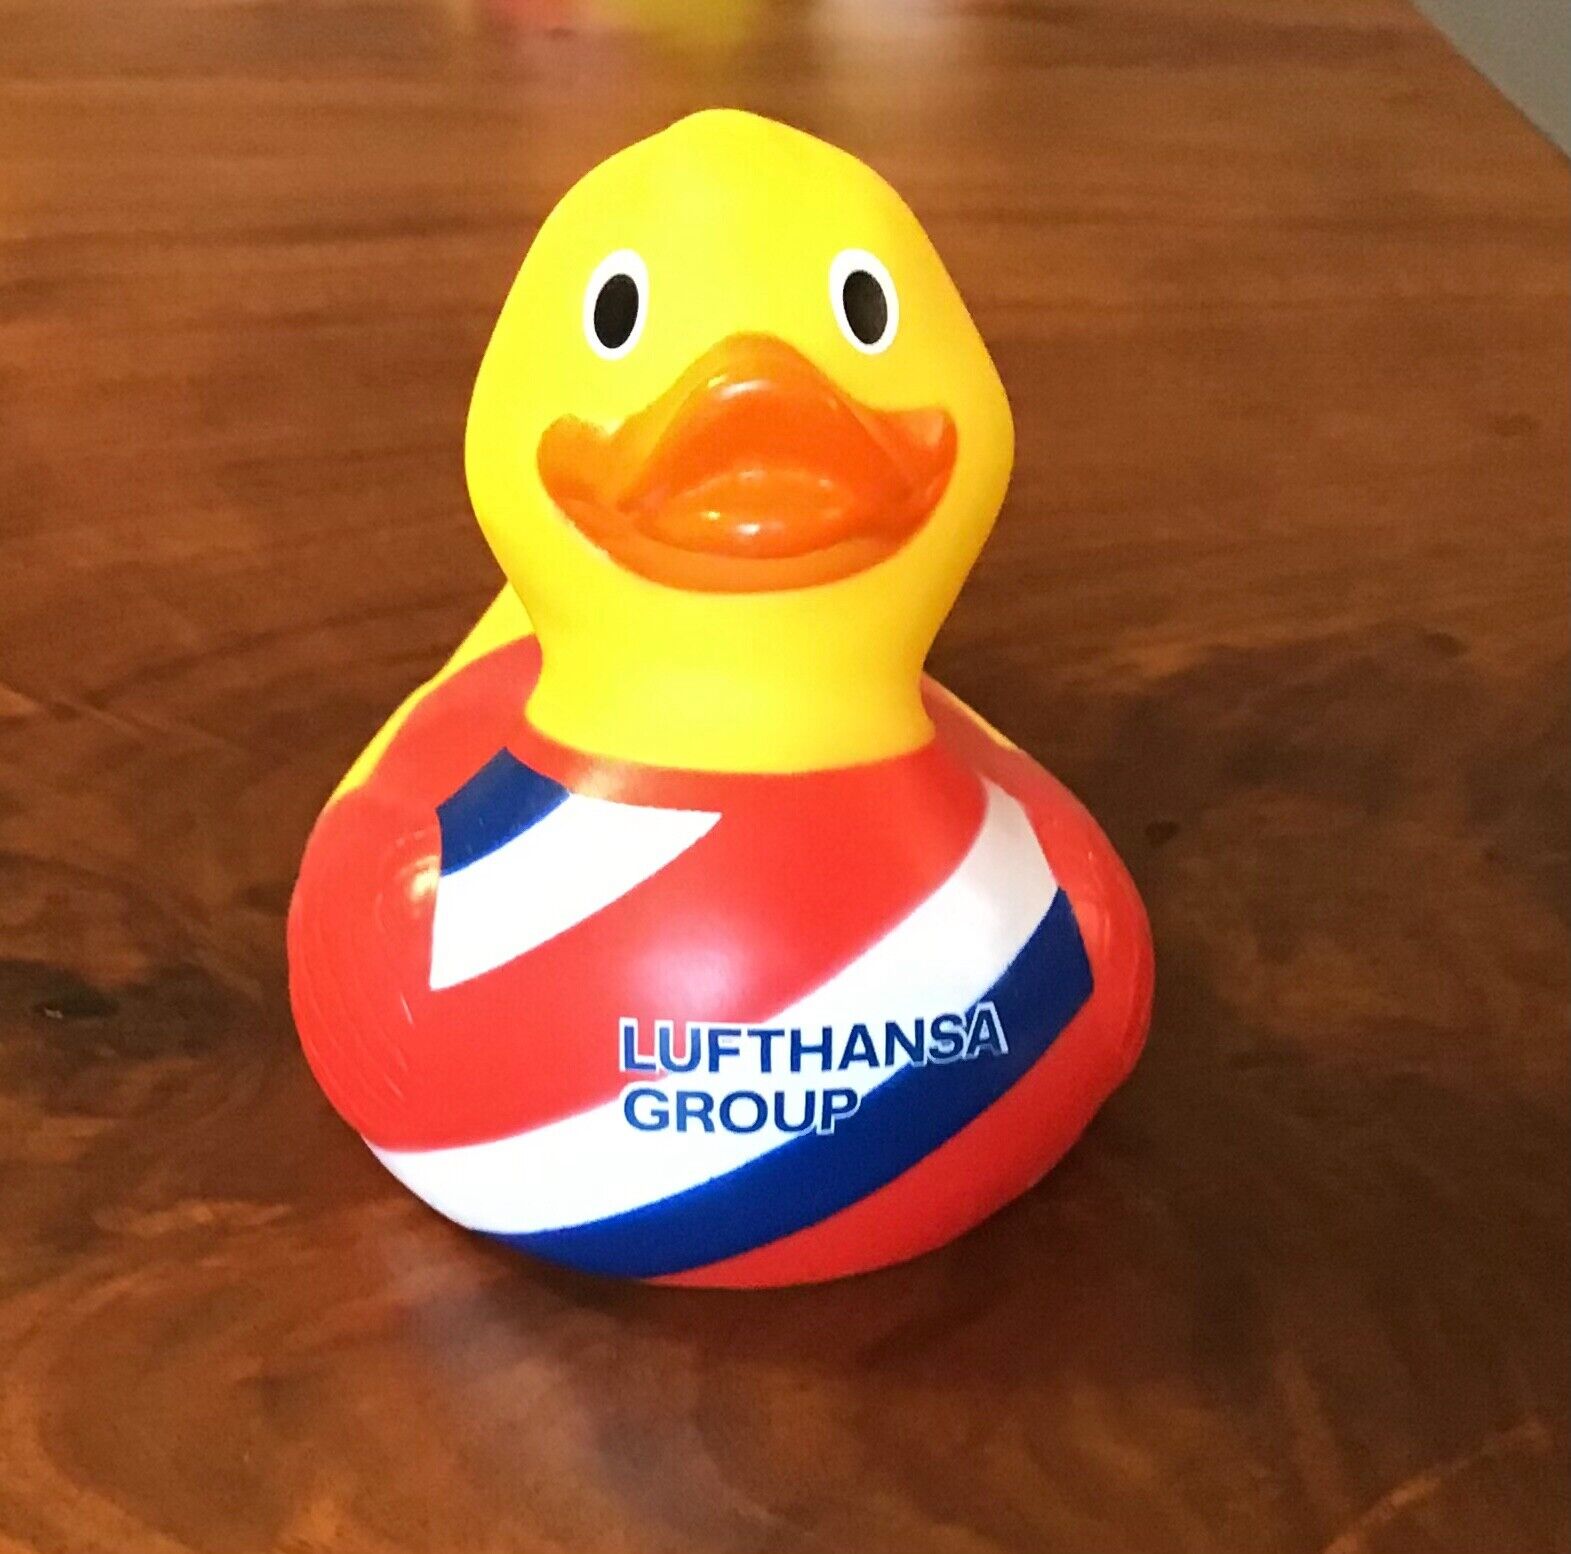 Lufthansa World Cup Soccer Costa Rica - Rubber Duck - Created Fro 2018 World Cup